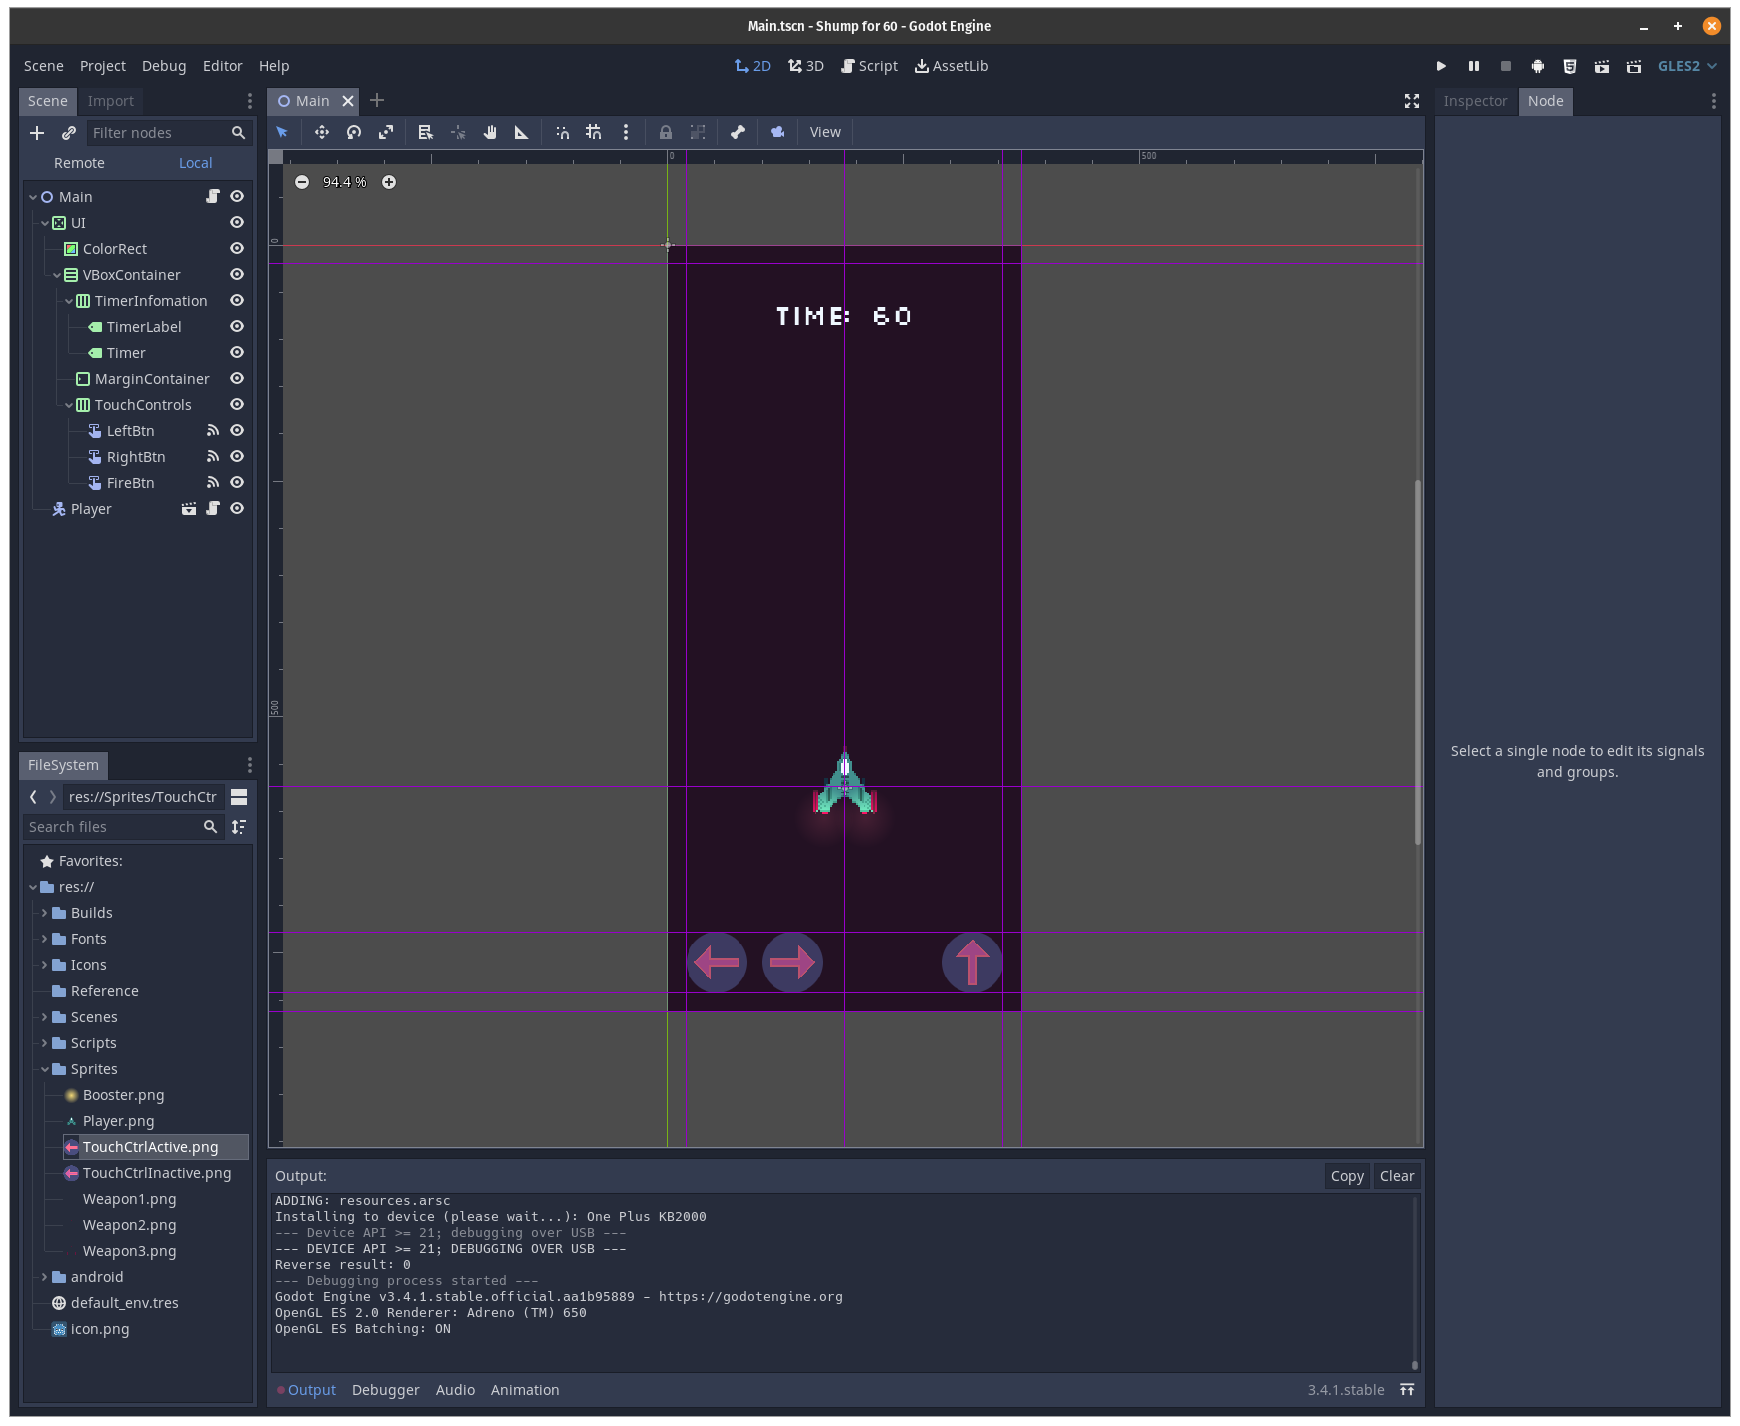 Screenshot of Godot environment for sixty second shump